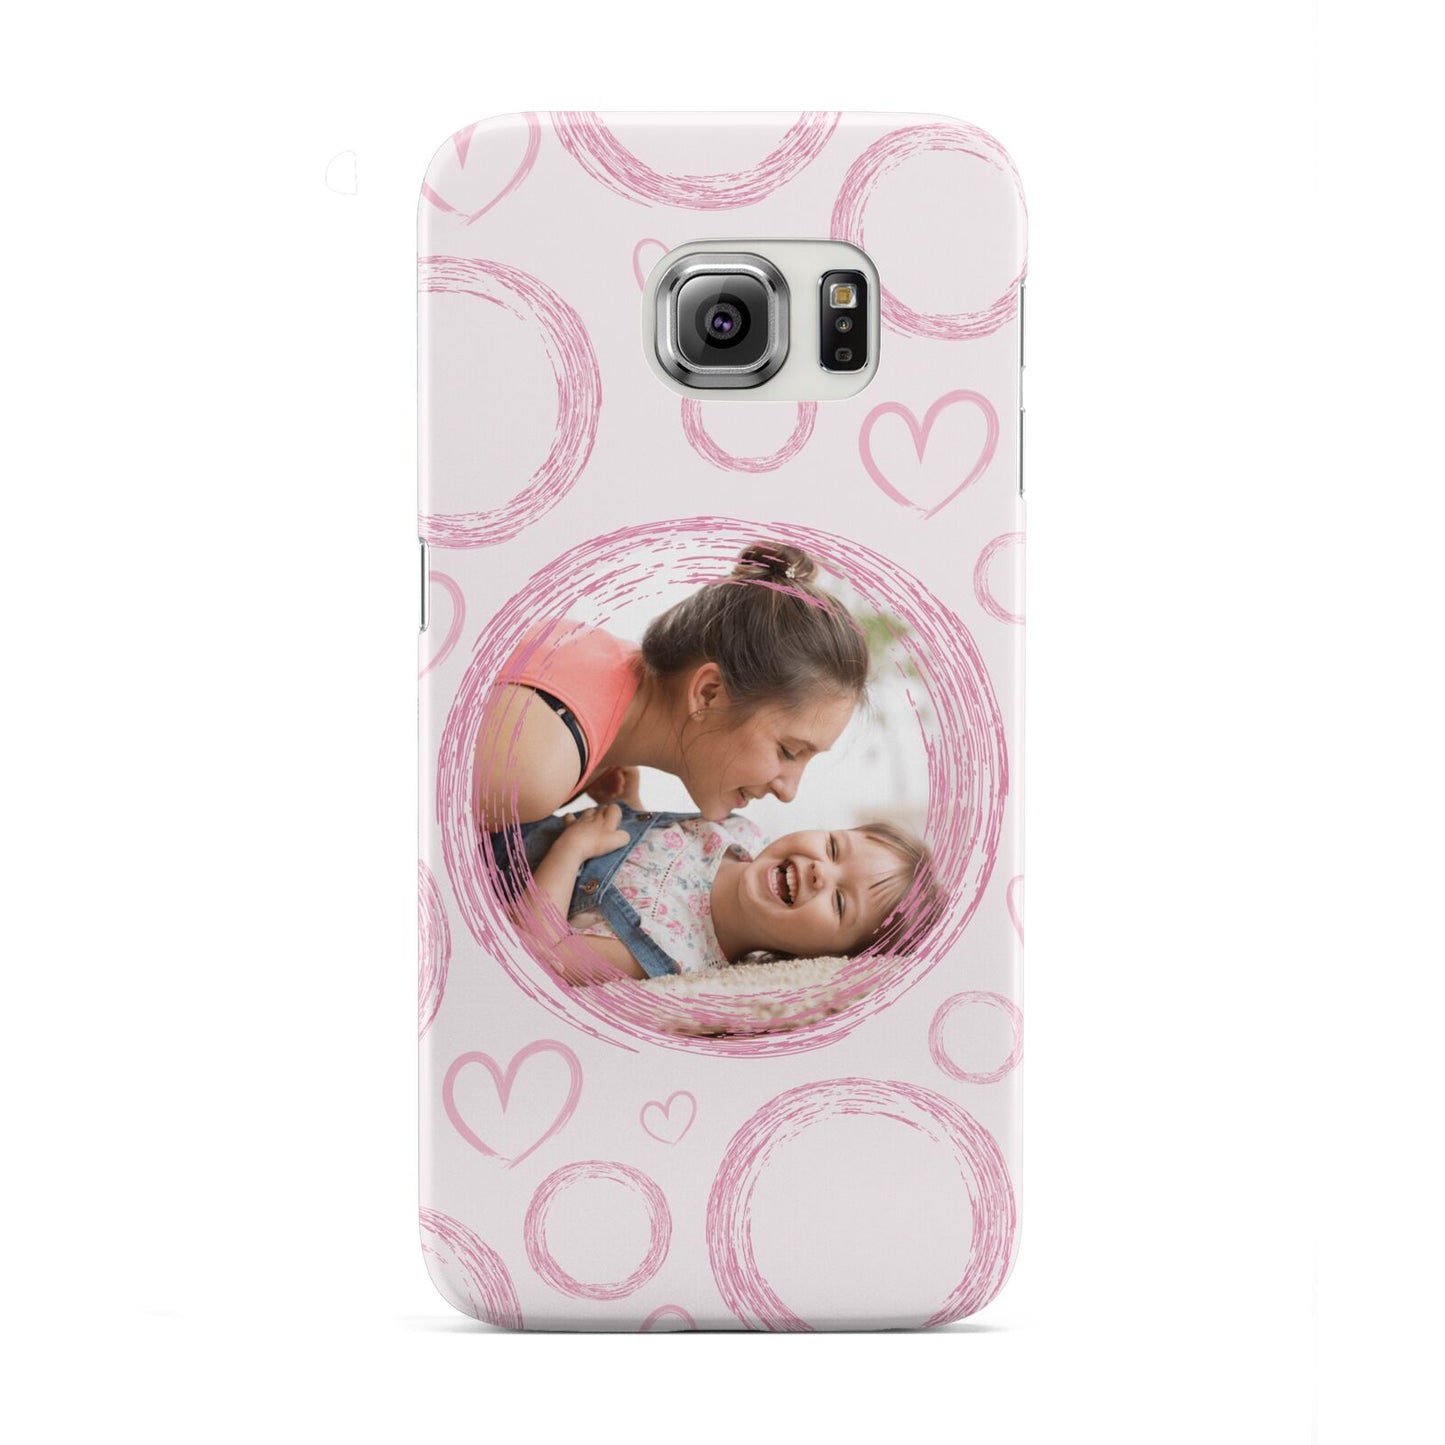 Pink Love Hearts Photo Personalised Samsung Galaxy S6 Edge Case